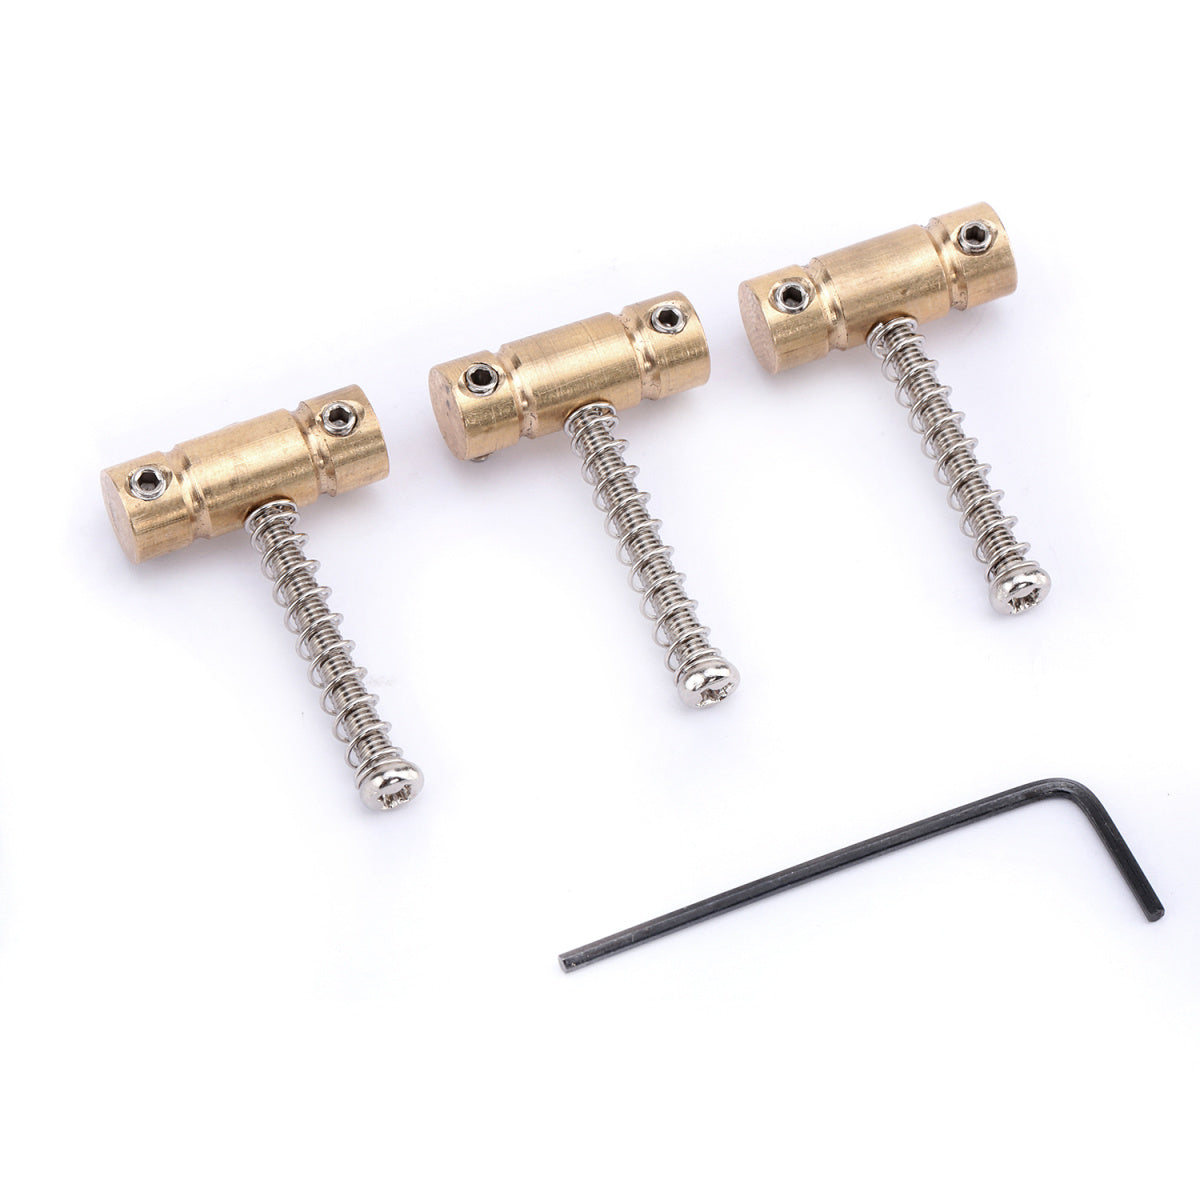 Musiclily Pro 54mm Vintage Compensated Telecaster Bridge Brass Saddle Set for Tele Style Guitar (3 Pieces)